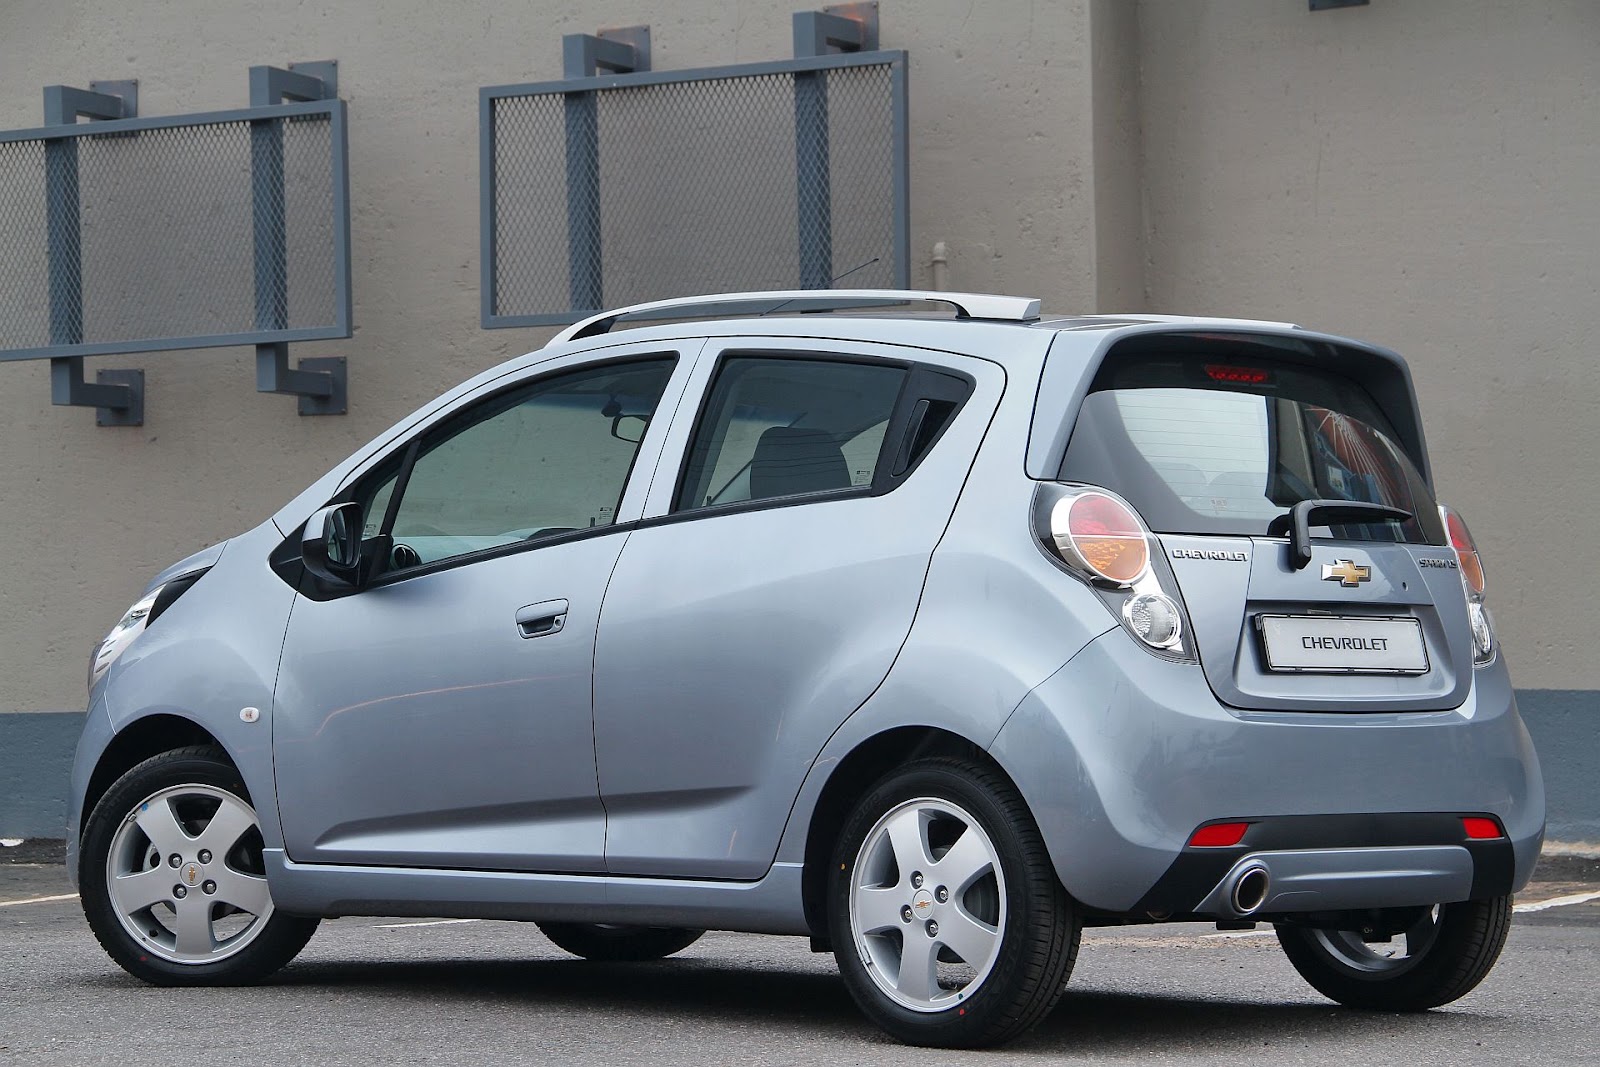 IN4RIDE: CHEVROLET SPARK. NOW MADE IN MZANSI